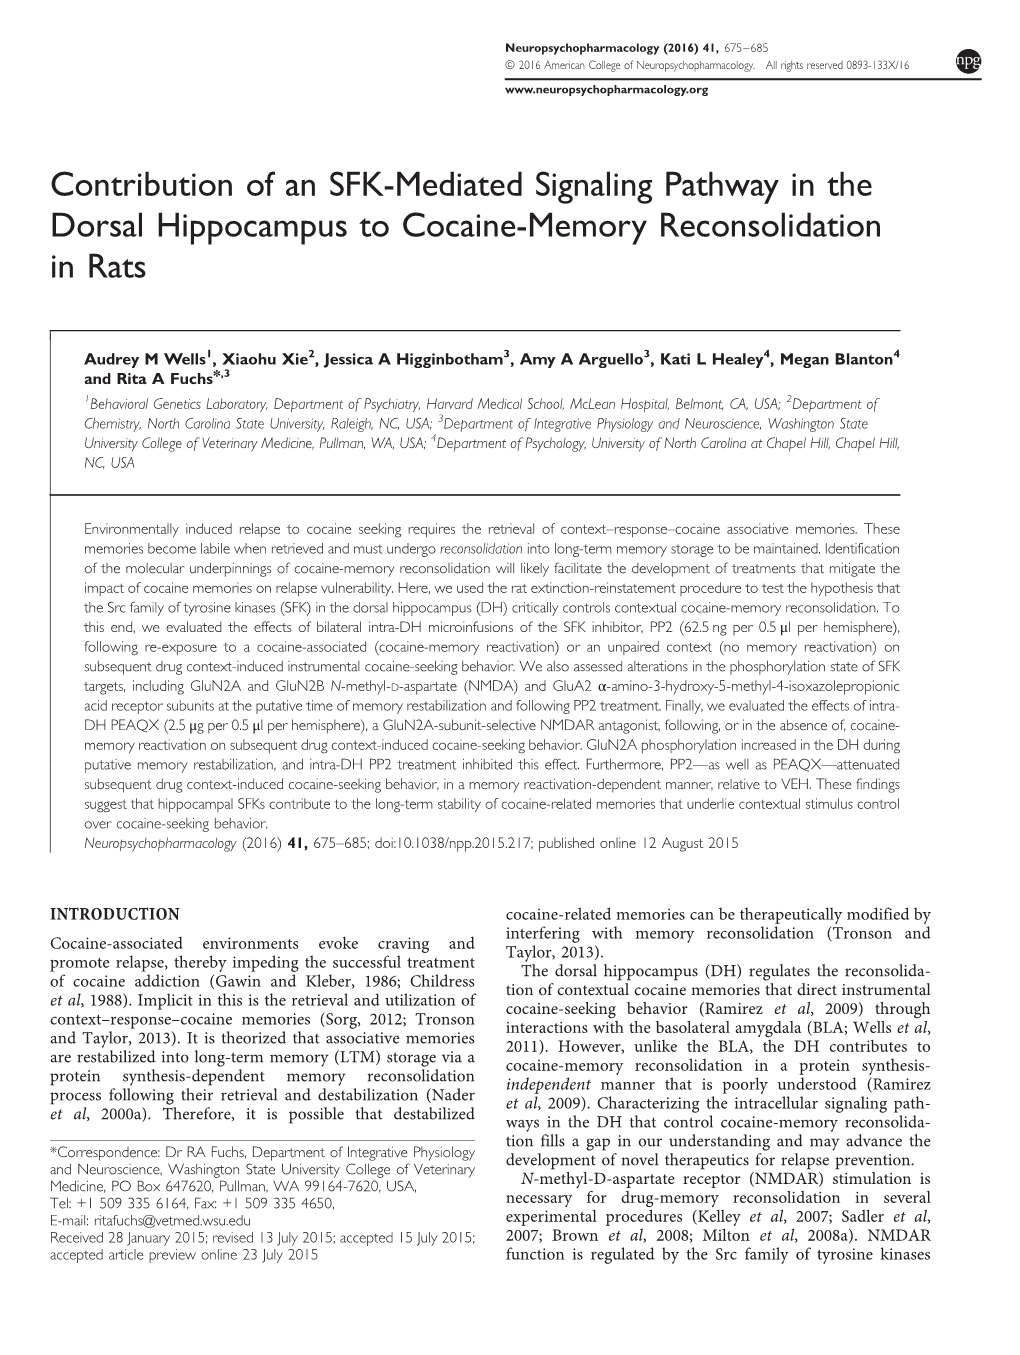 Contribution of an SFK-Mediated Signaling Pathway in the Dorsal Hippocampus to Cocaine-Memory Reconsolidation in Rats